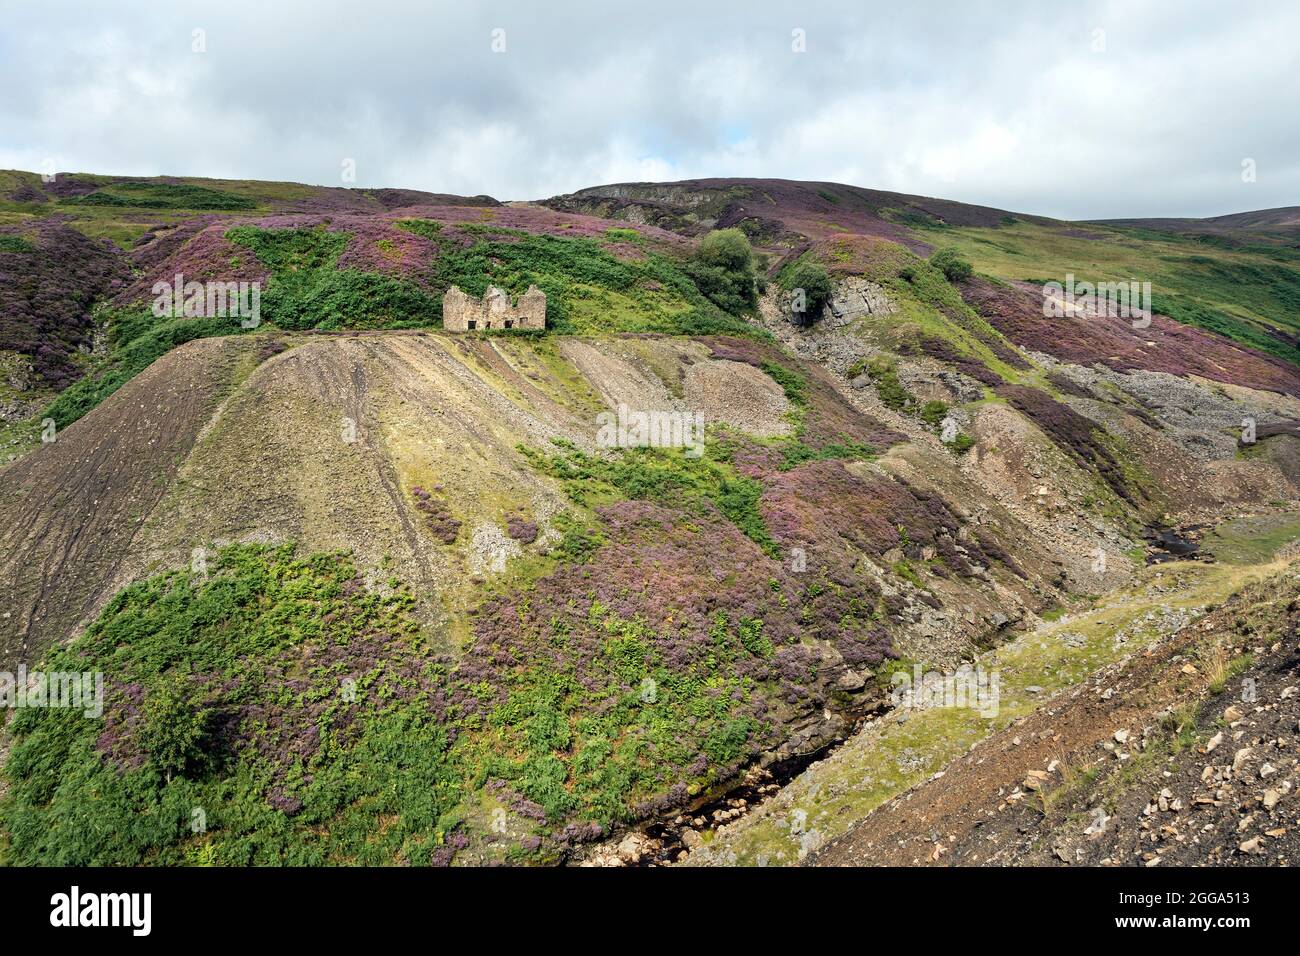 Nature Slowly Reclaiming the Industrial Landscape Surrounding the Bunton Mine in Gunnerside Gill, Swaledale, Yorkshire Dales, UK Stock Photo